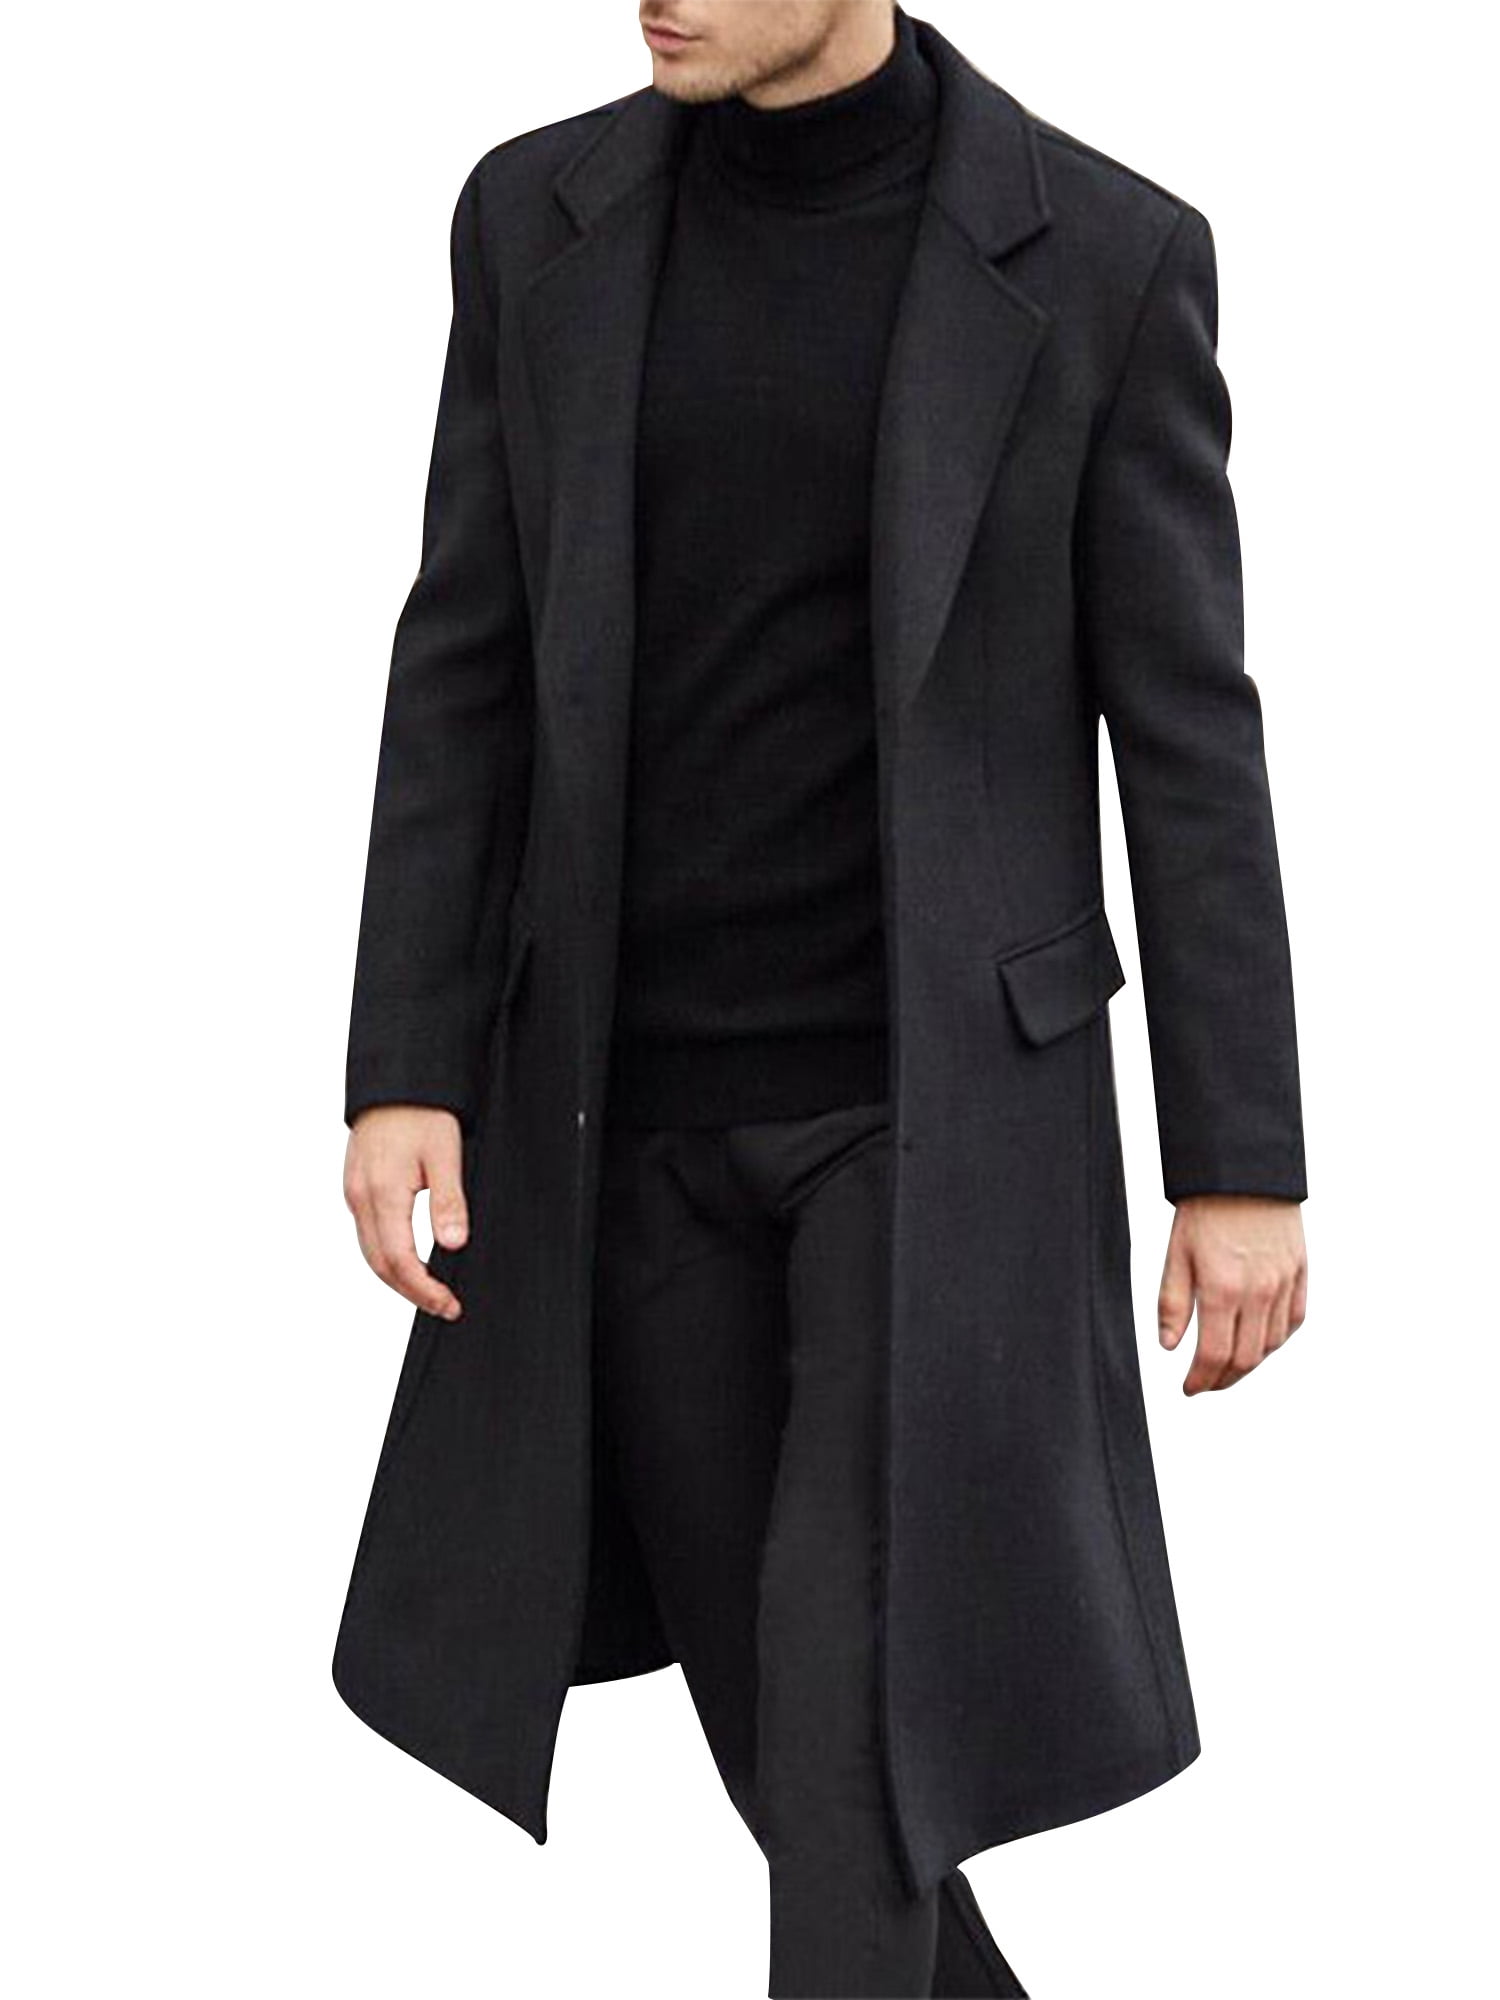 Men's Long sleeve Double Breasted Trench Coat Wool Blend Jacket Stand collar L 